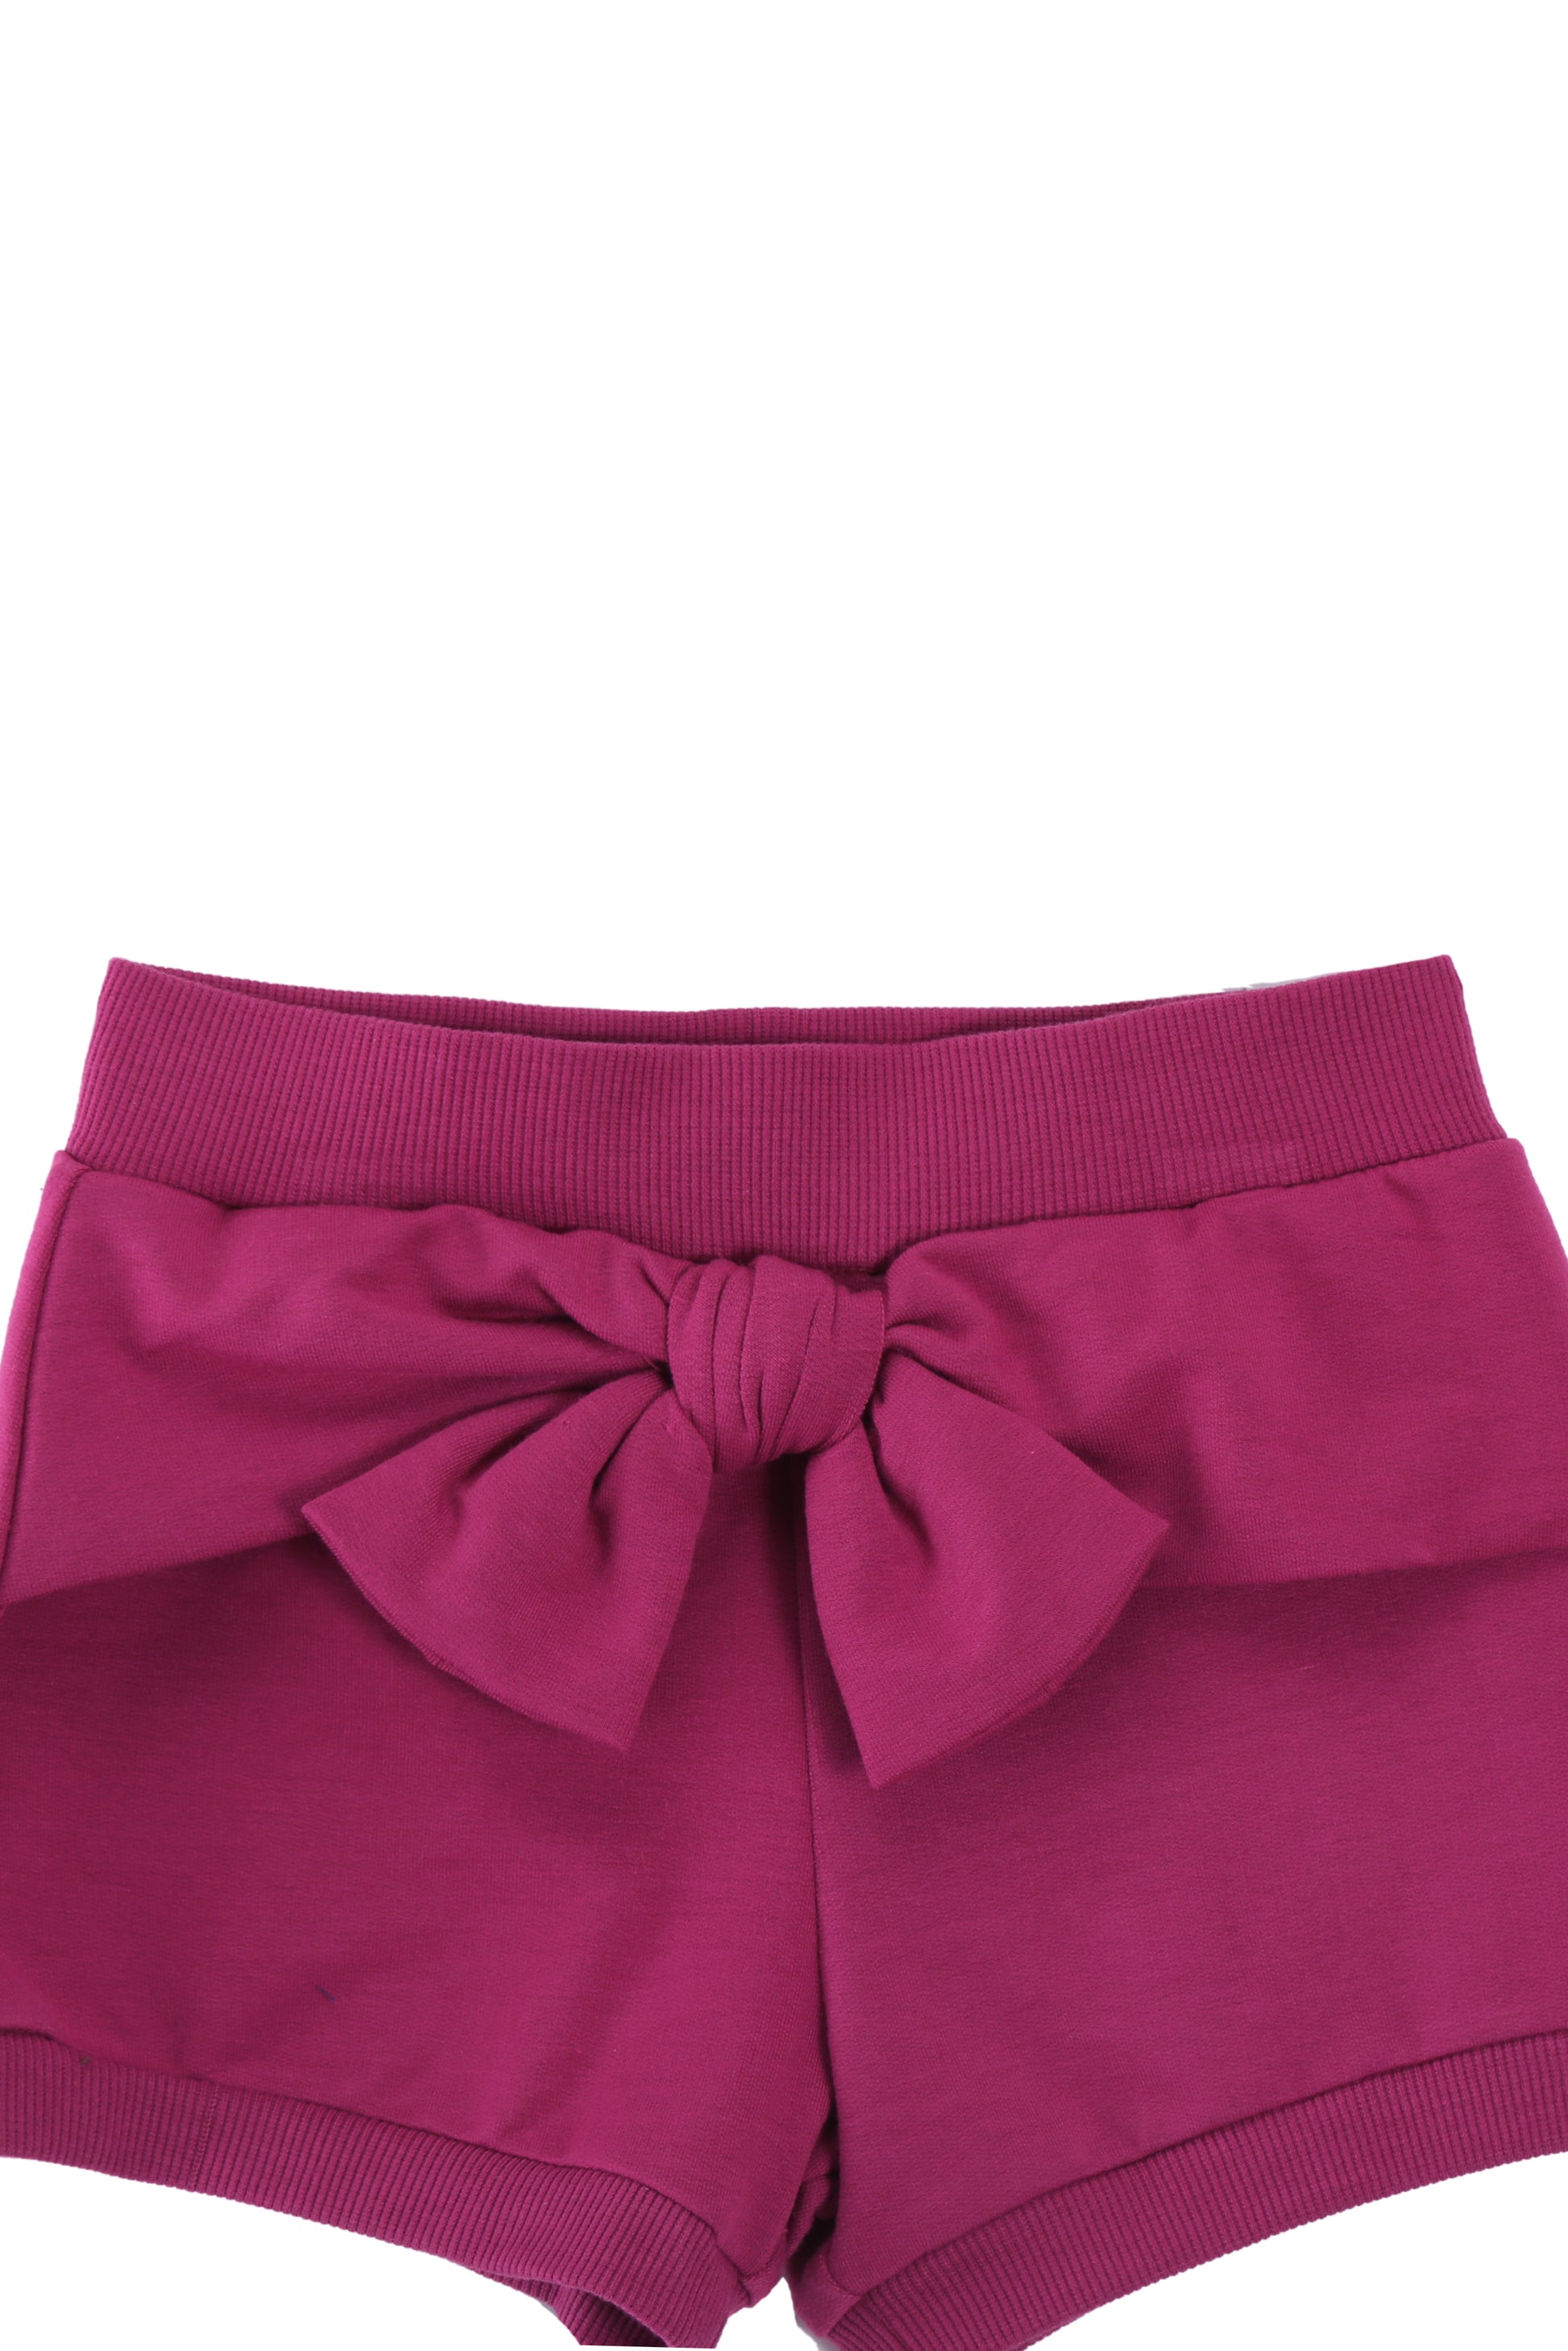 CLOSE UP OF DARK MAGENTA FRENCH TERRY SWEATSHORTS WITH A BOW